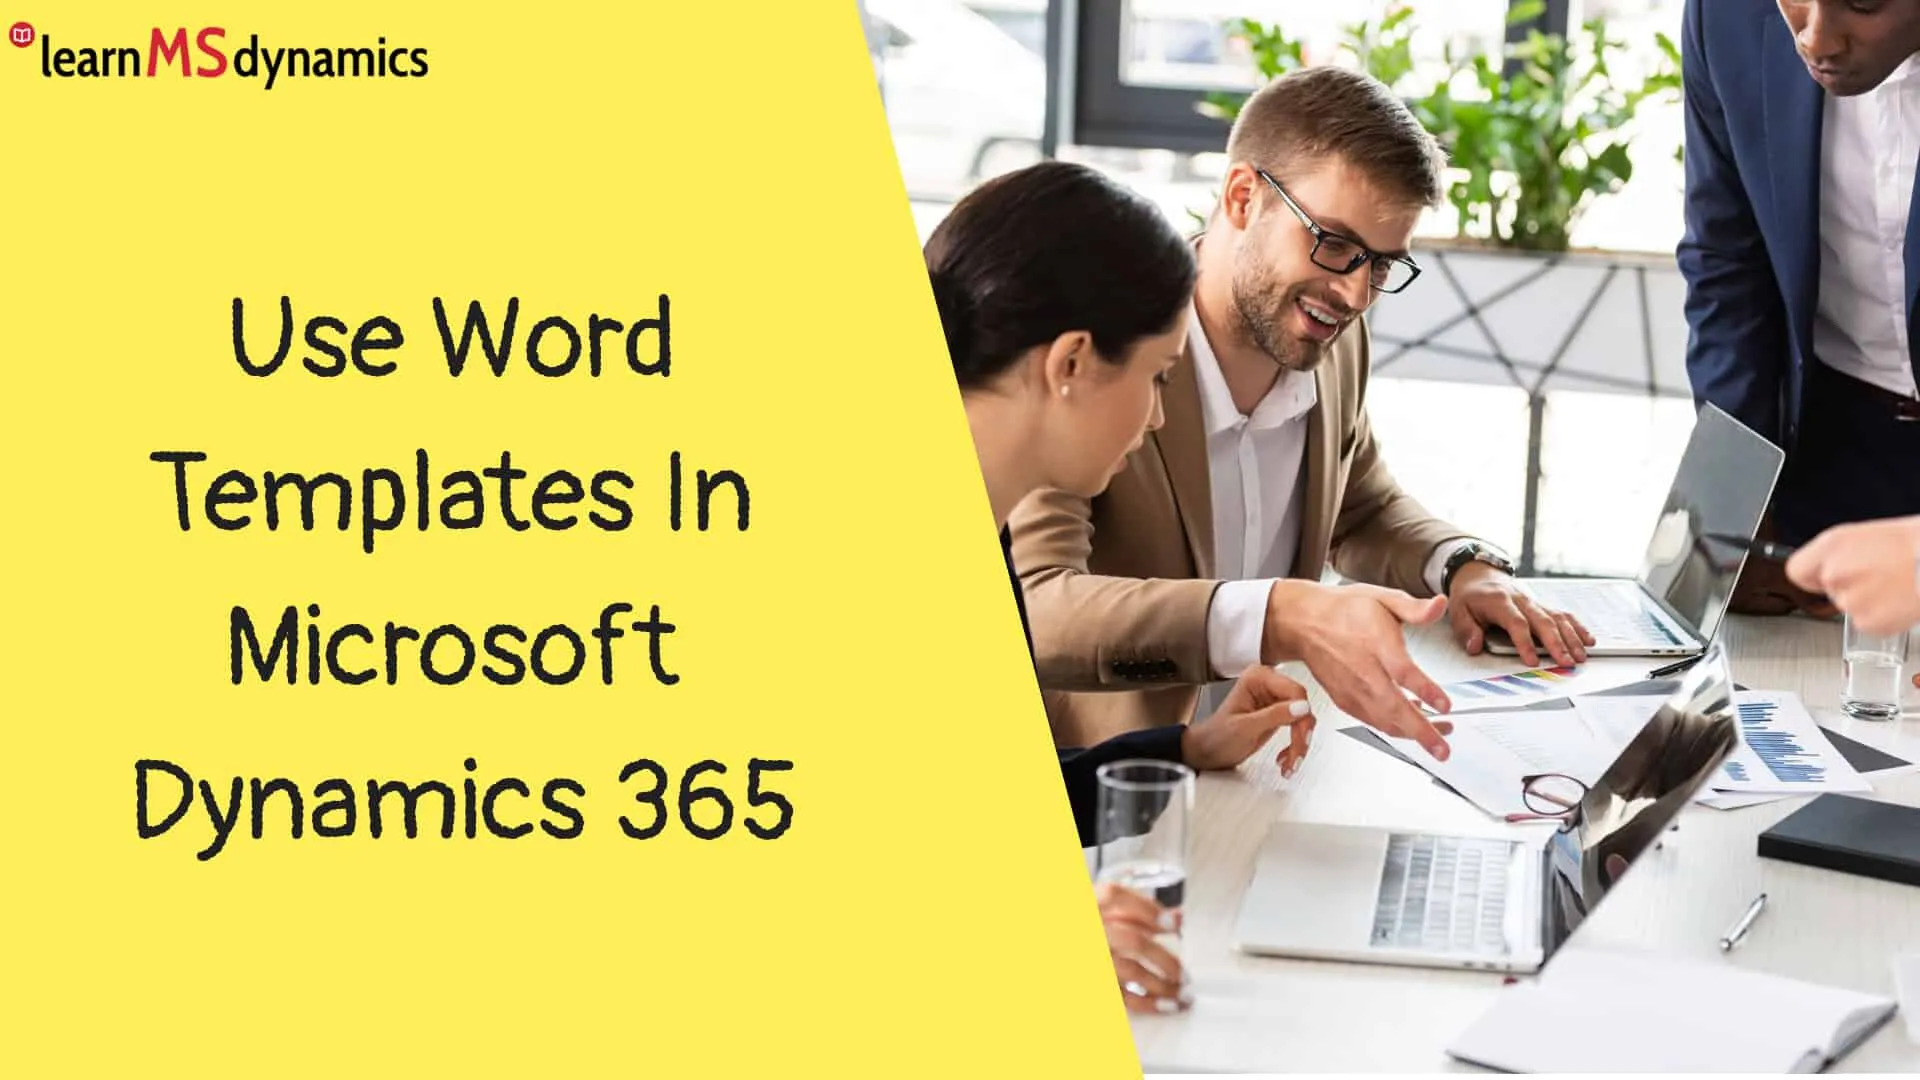 Use Word Templates In Microsoft Dynamics 365